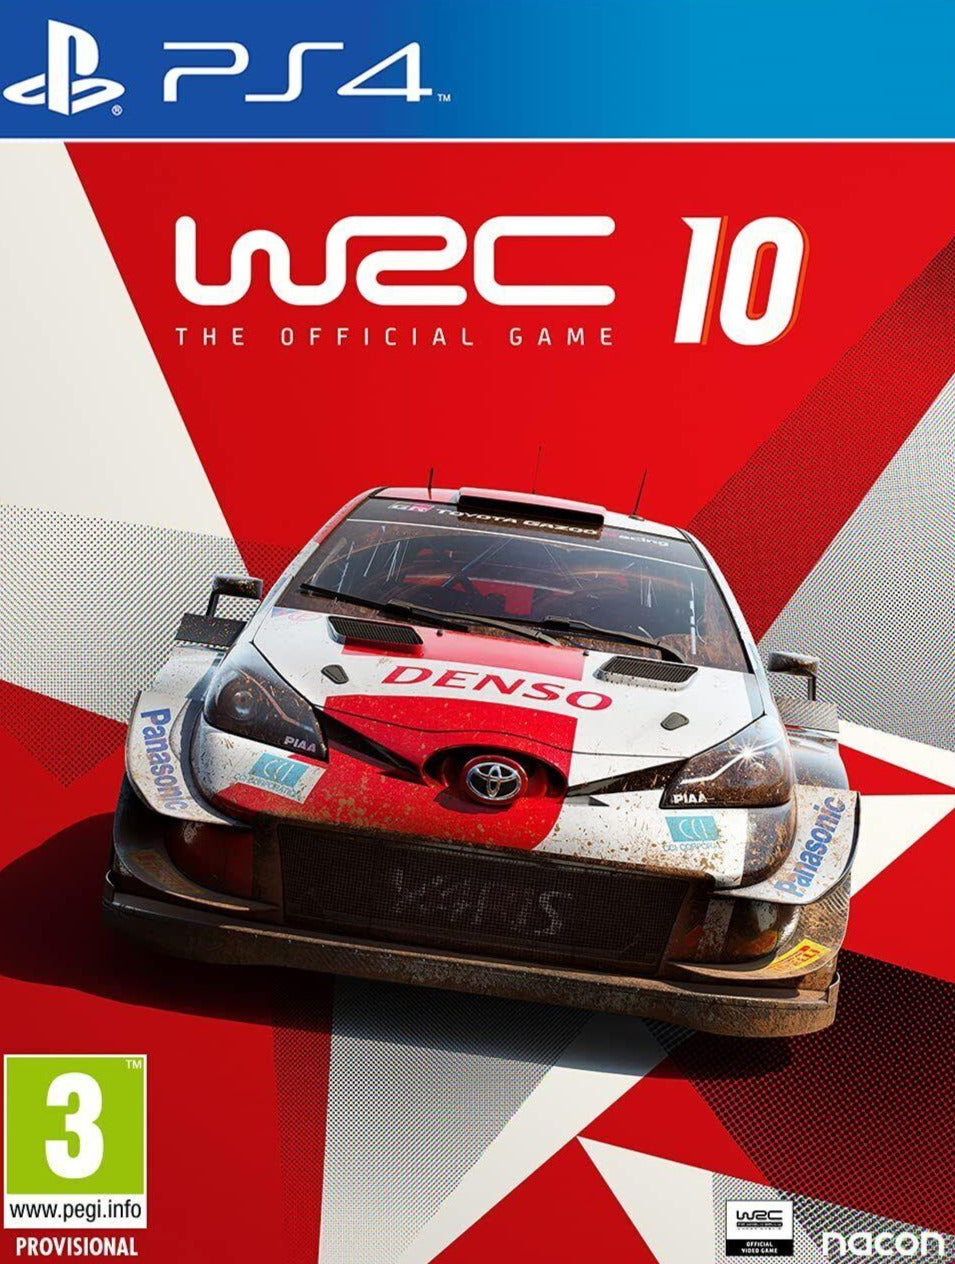 WRC 10 / PS4 / Playstation 4 - GD Games 